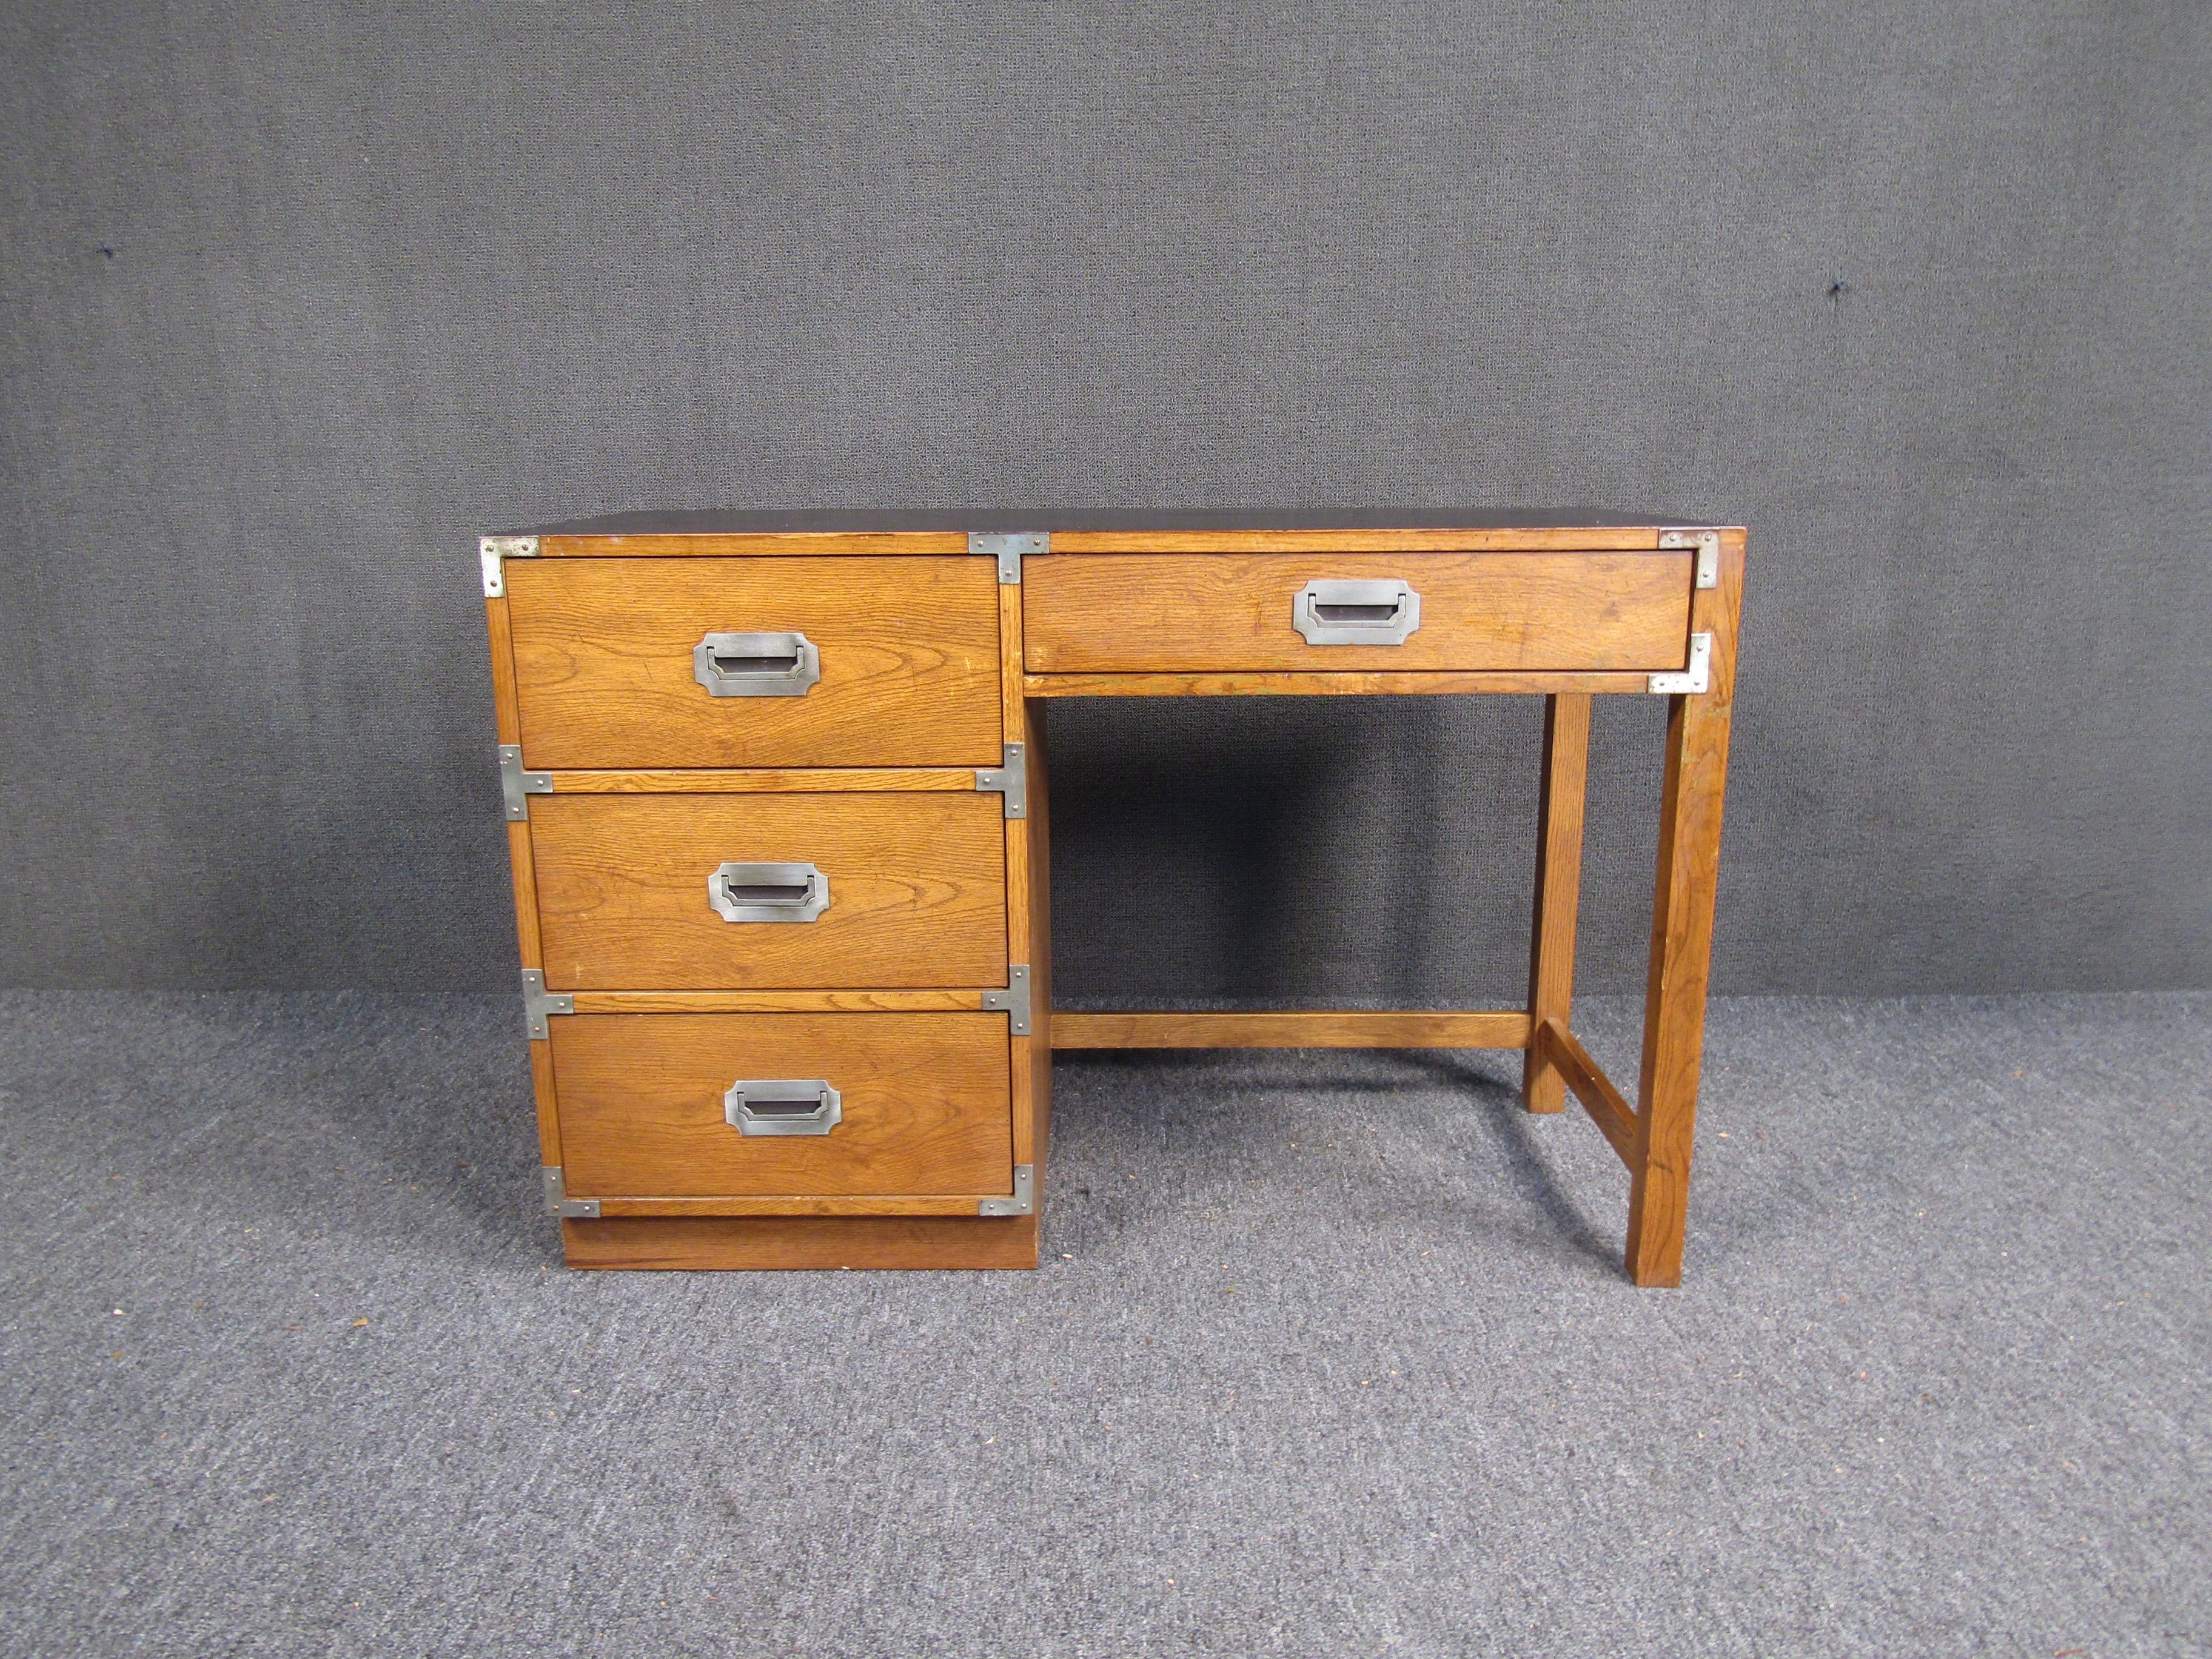 With four large drawers, sculpted legs, and a black-stained writing surface, this vintage campaign desk is perfect for any home office or study. Beautifully finished oak woodgrain complements Mid-Century design to make this piece stand out anywhere.